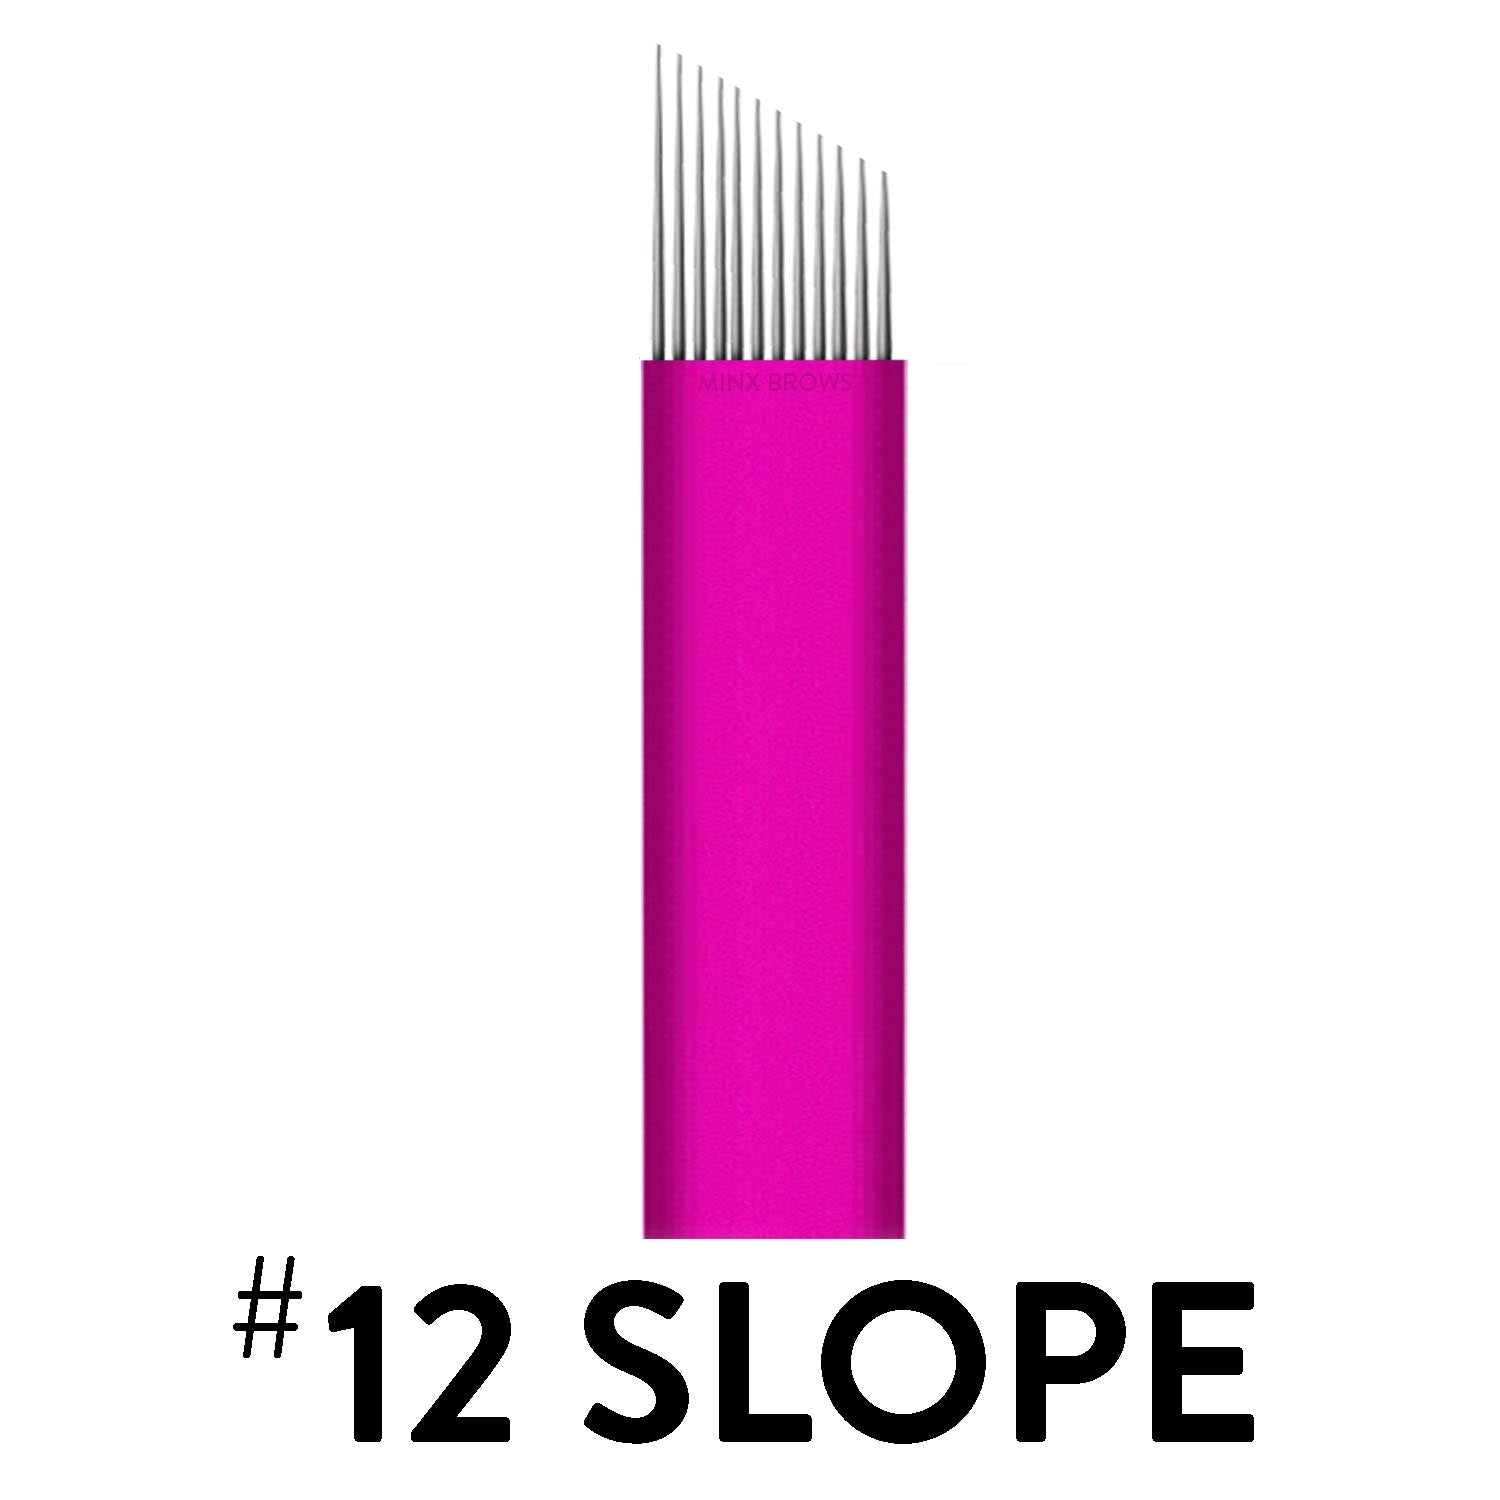 12 Slope - Pink Collection Microblade